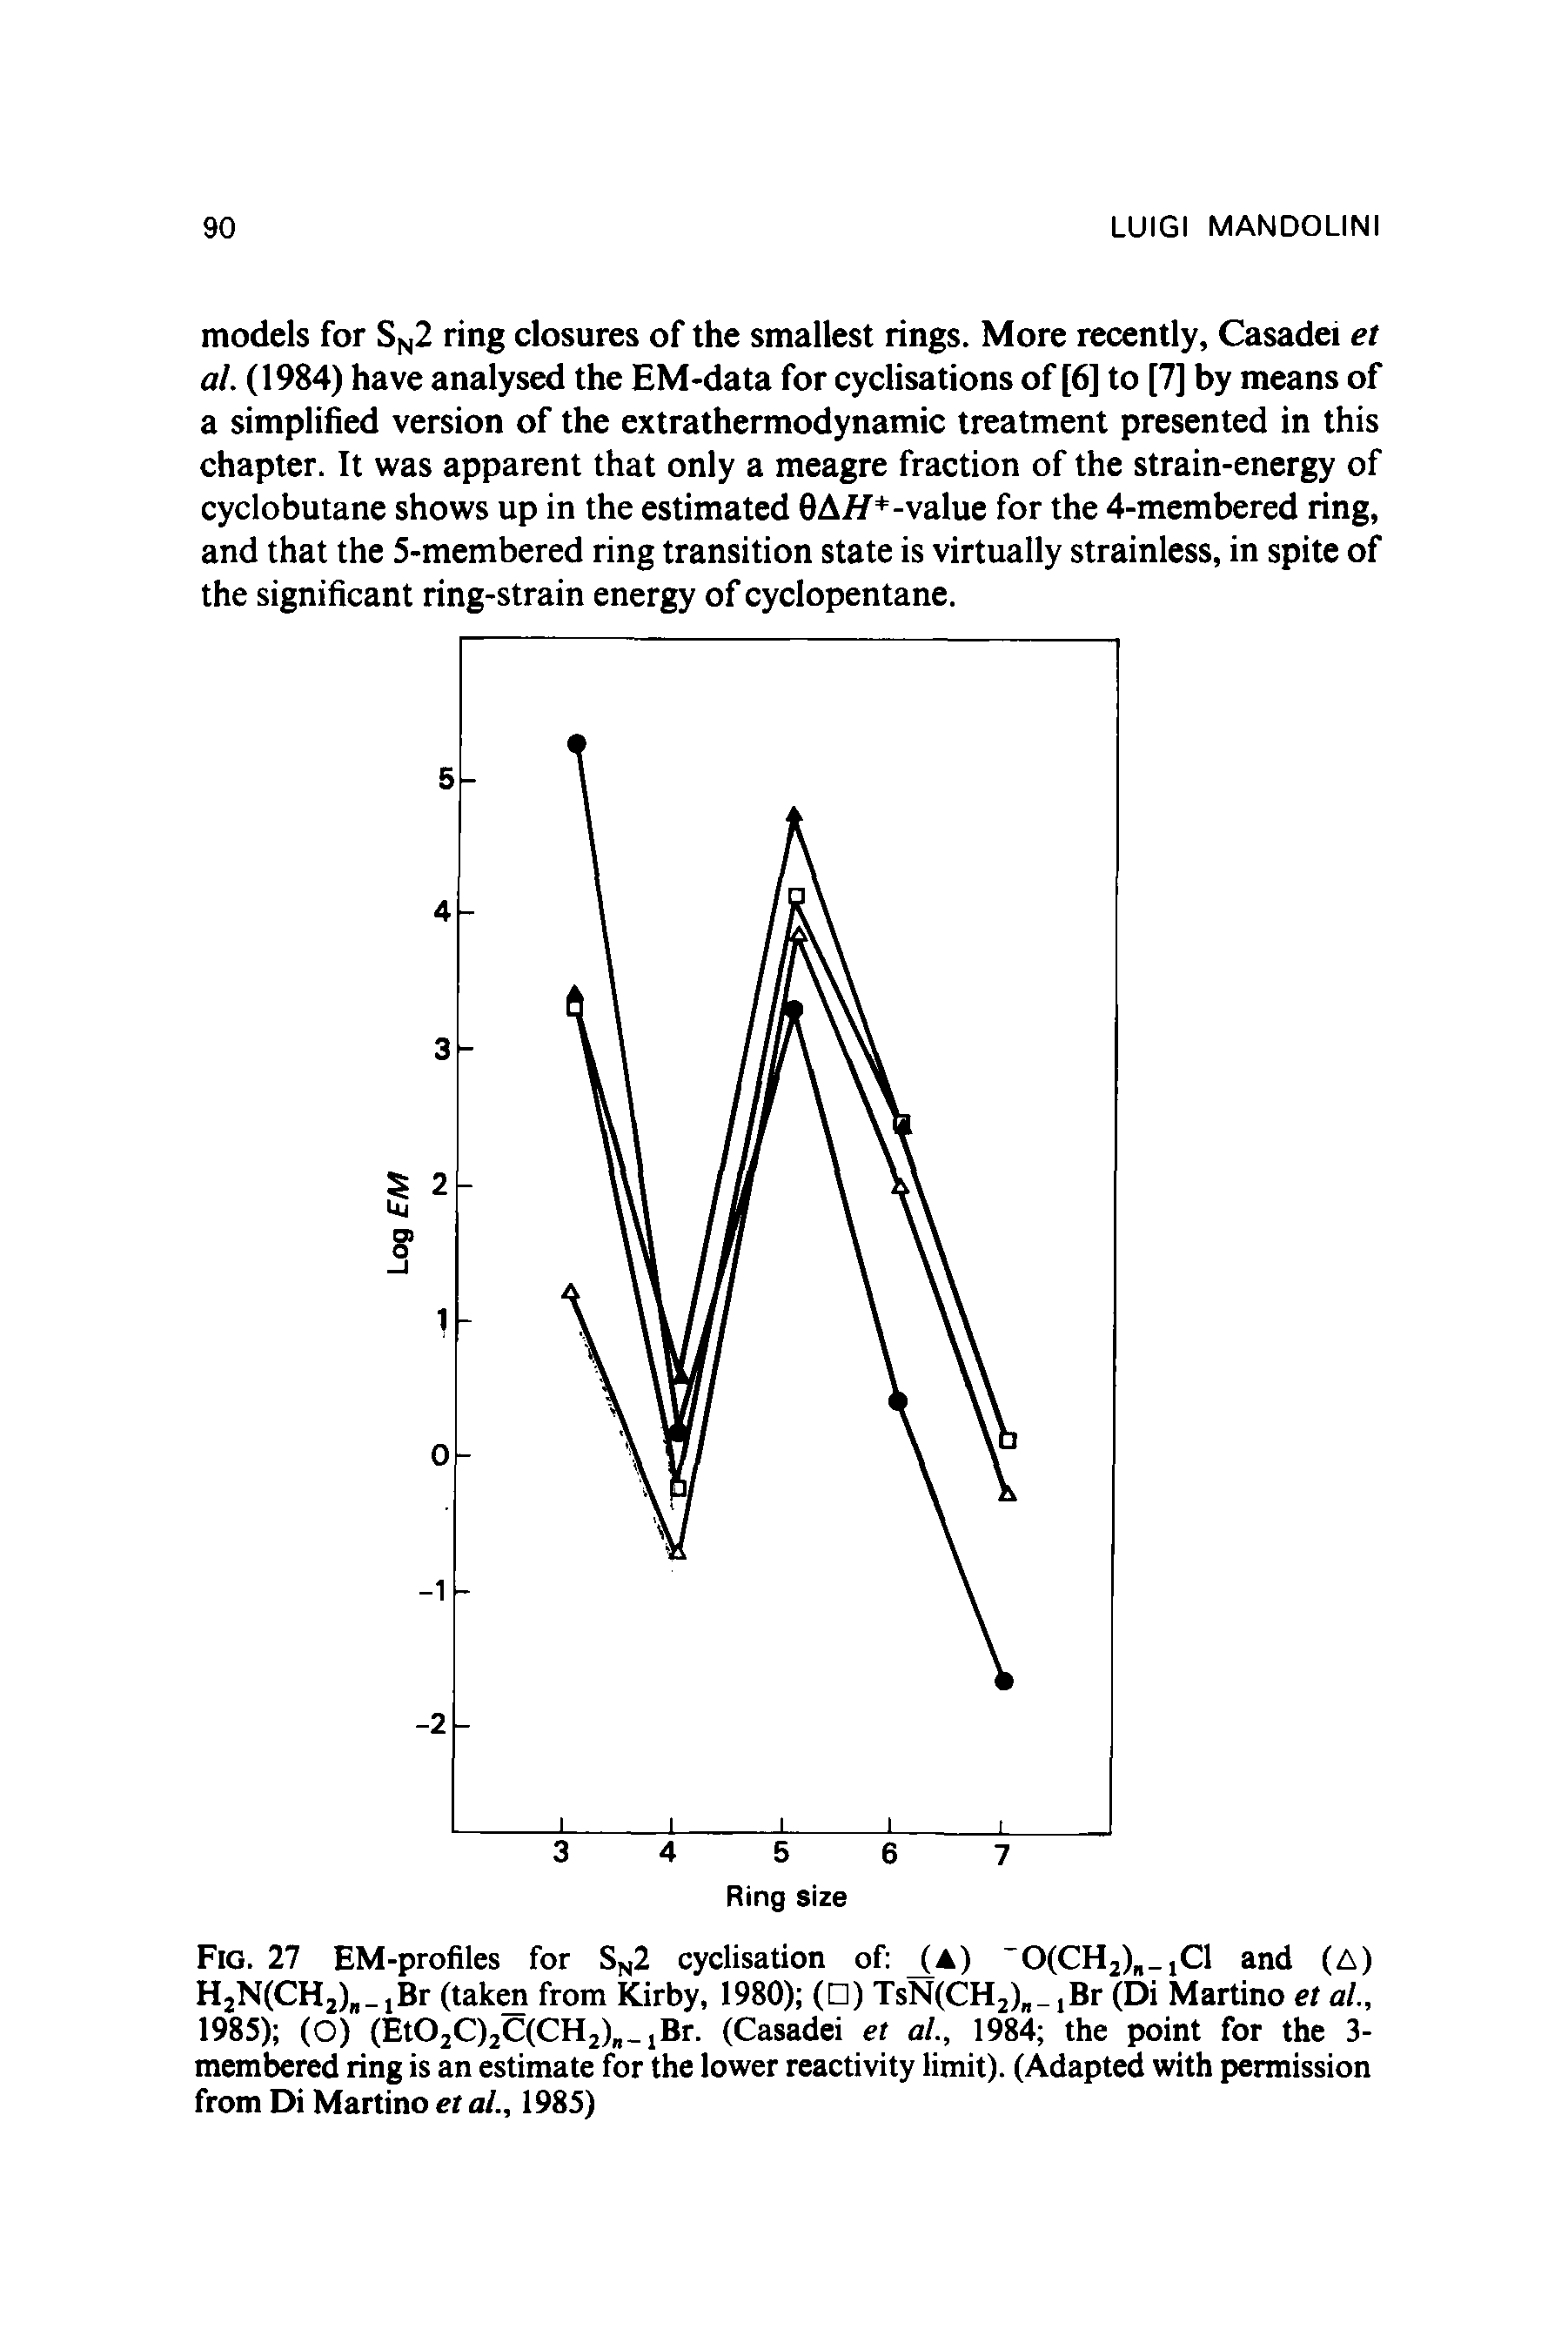 Fig. 27 EM-profiles for 8 2 cyclisation of (A) O(CH2) iCl and (A) HjNCCHjln-iBr (tak from Kirby, 1980) ( ) TsNlCHj),. jBr (Di Martino et al., 1985) (O) (EtO2C)2C(CH2) iBr. (Casadei et al., 1984 the point for the 3-membered ring is an estimate for the lower reactivity limit). (Adapted with permission from Di Martino et al., 1985)...